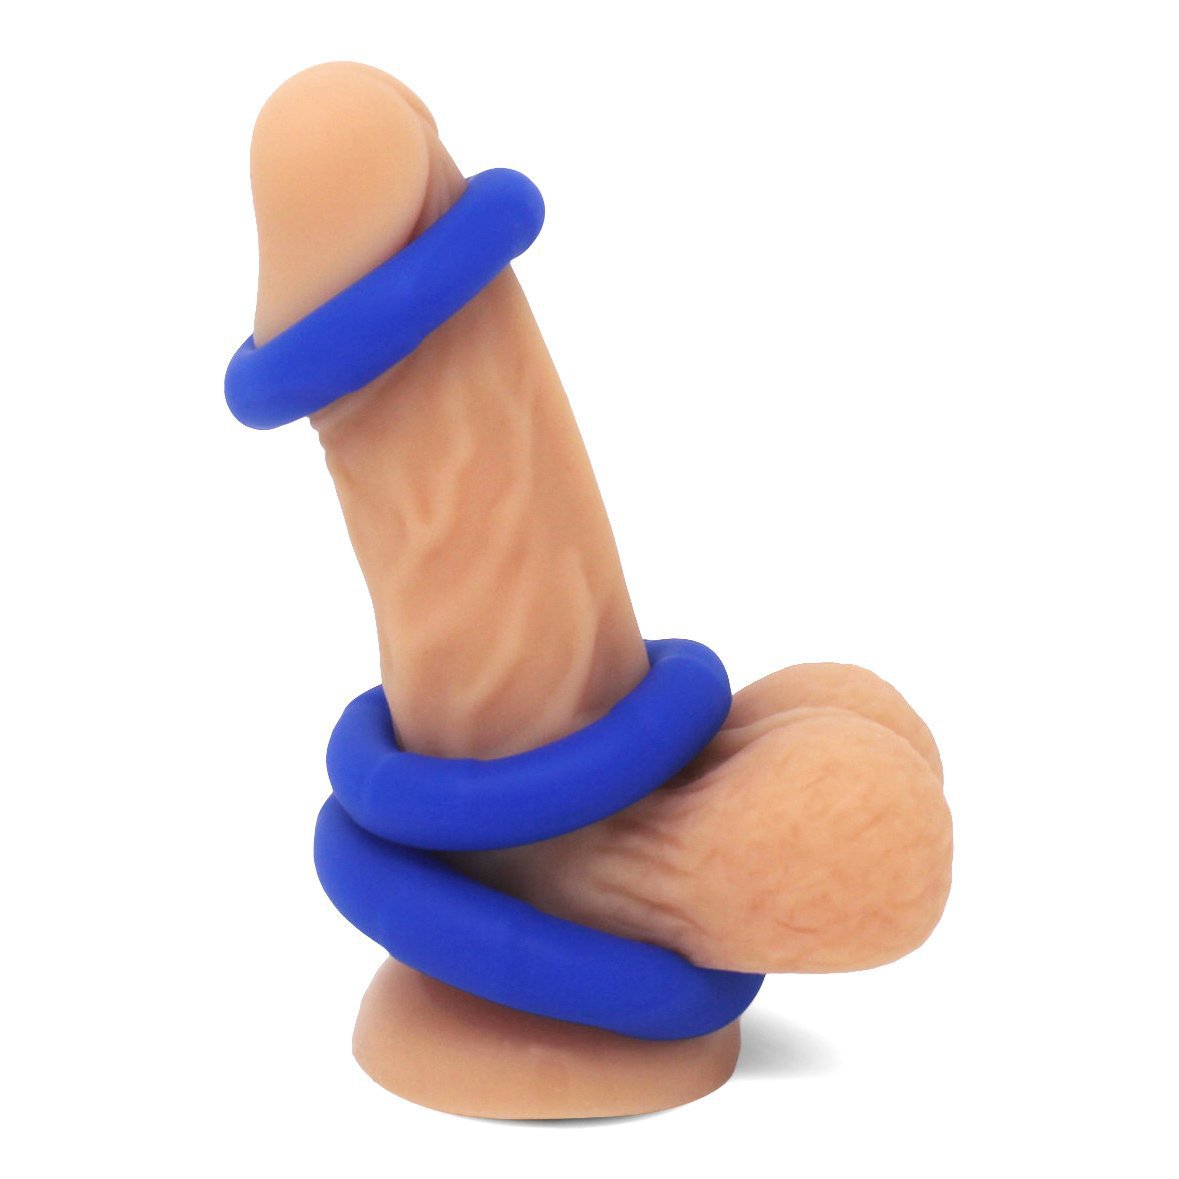 Lynk Pleasure Loop XL Silicone Cock Ring Kit and Ball Stretching Set for Men Cock Rings